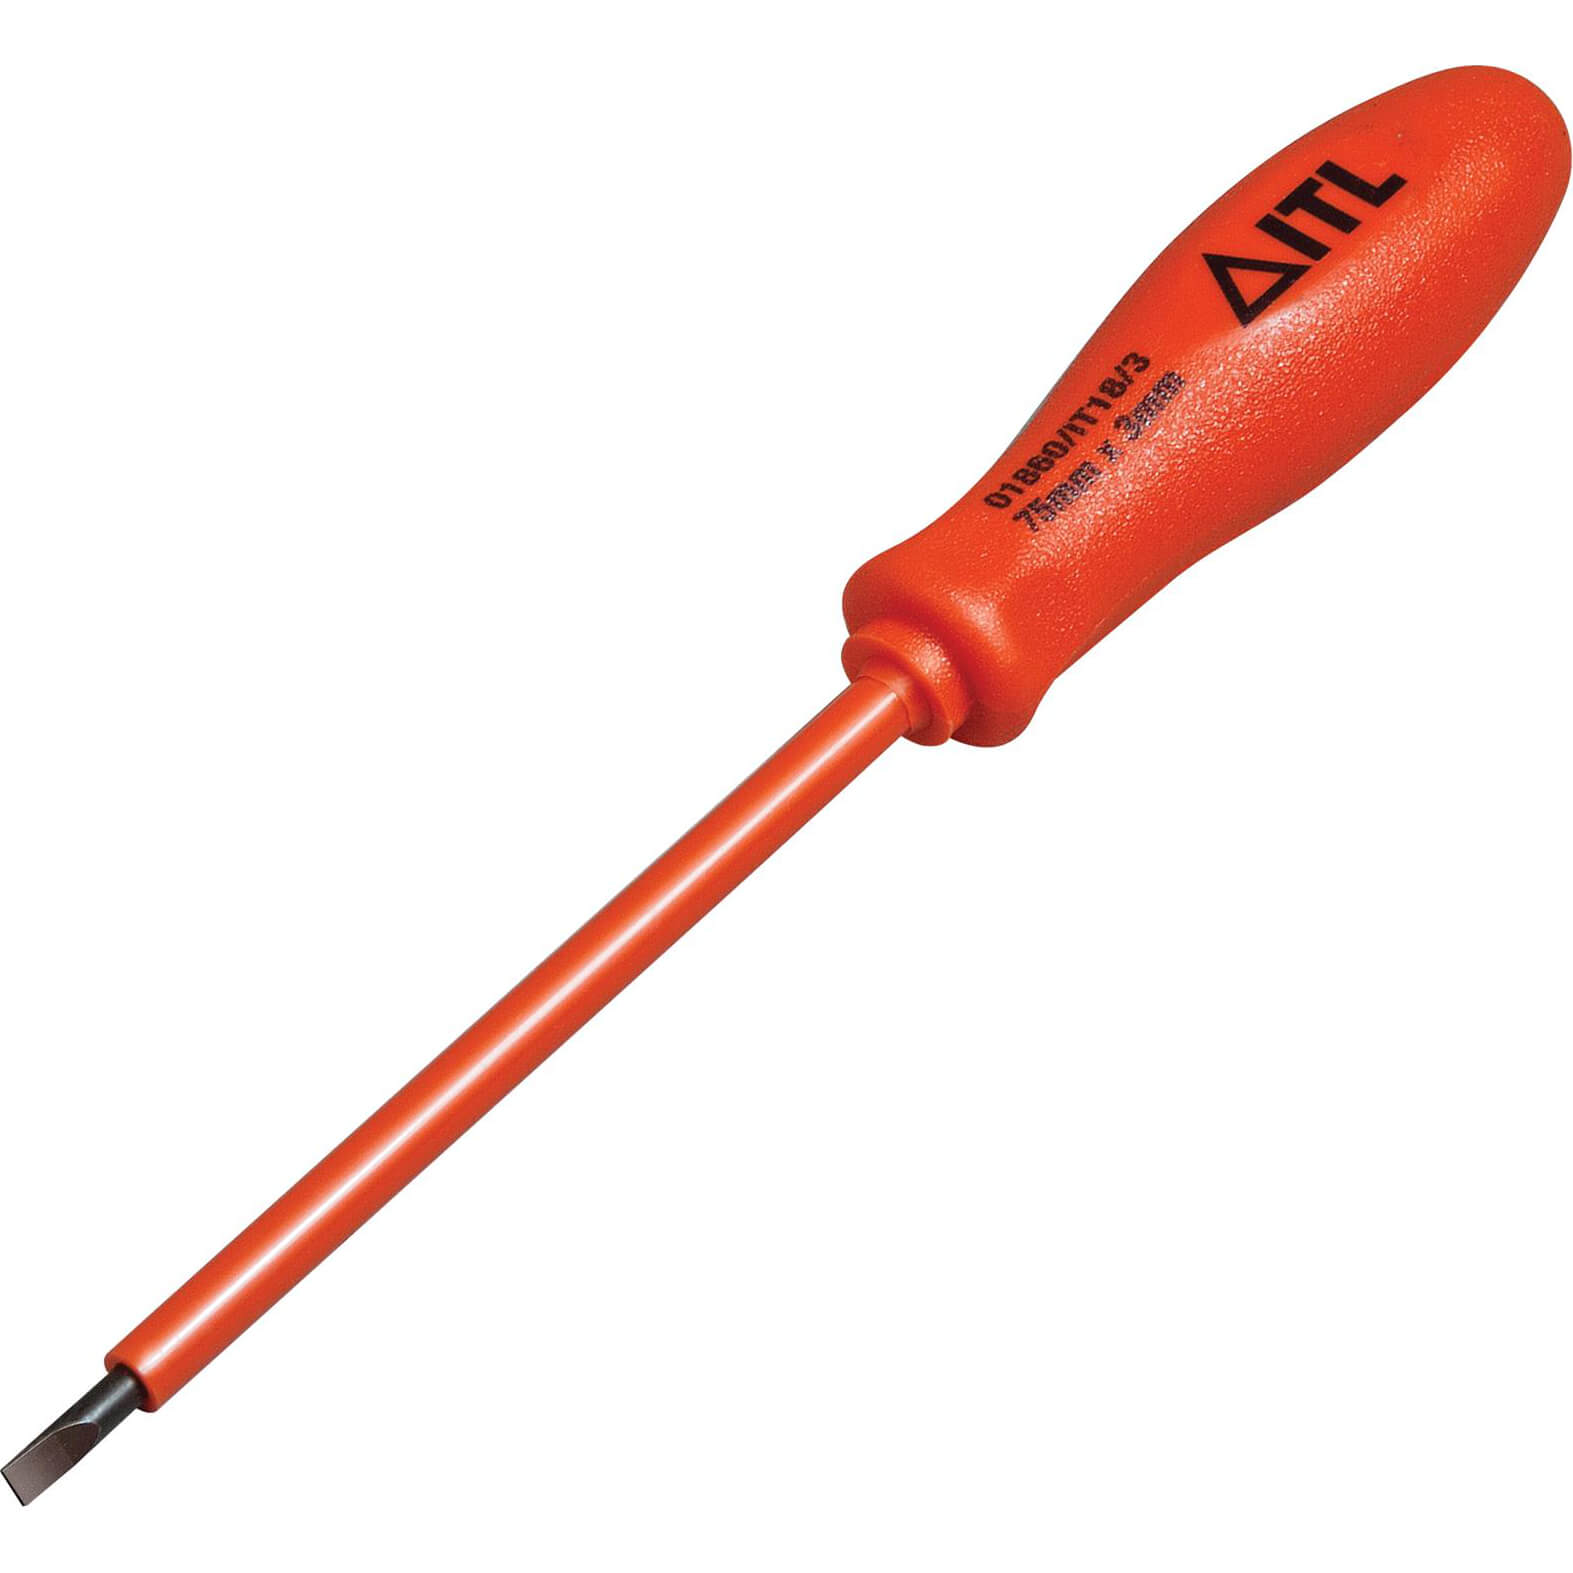 Image of ITL Insulated Parallel Slotted Terminal Screwdriver 3mm 75mm